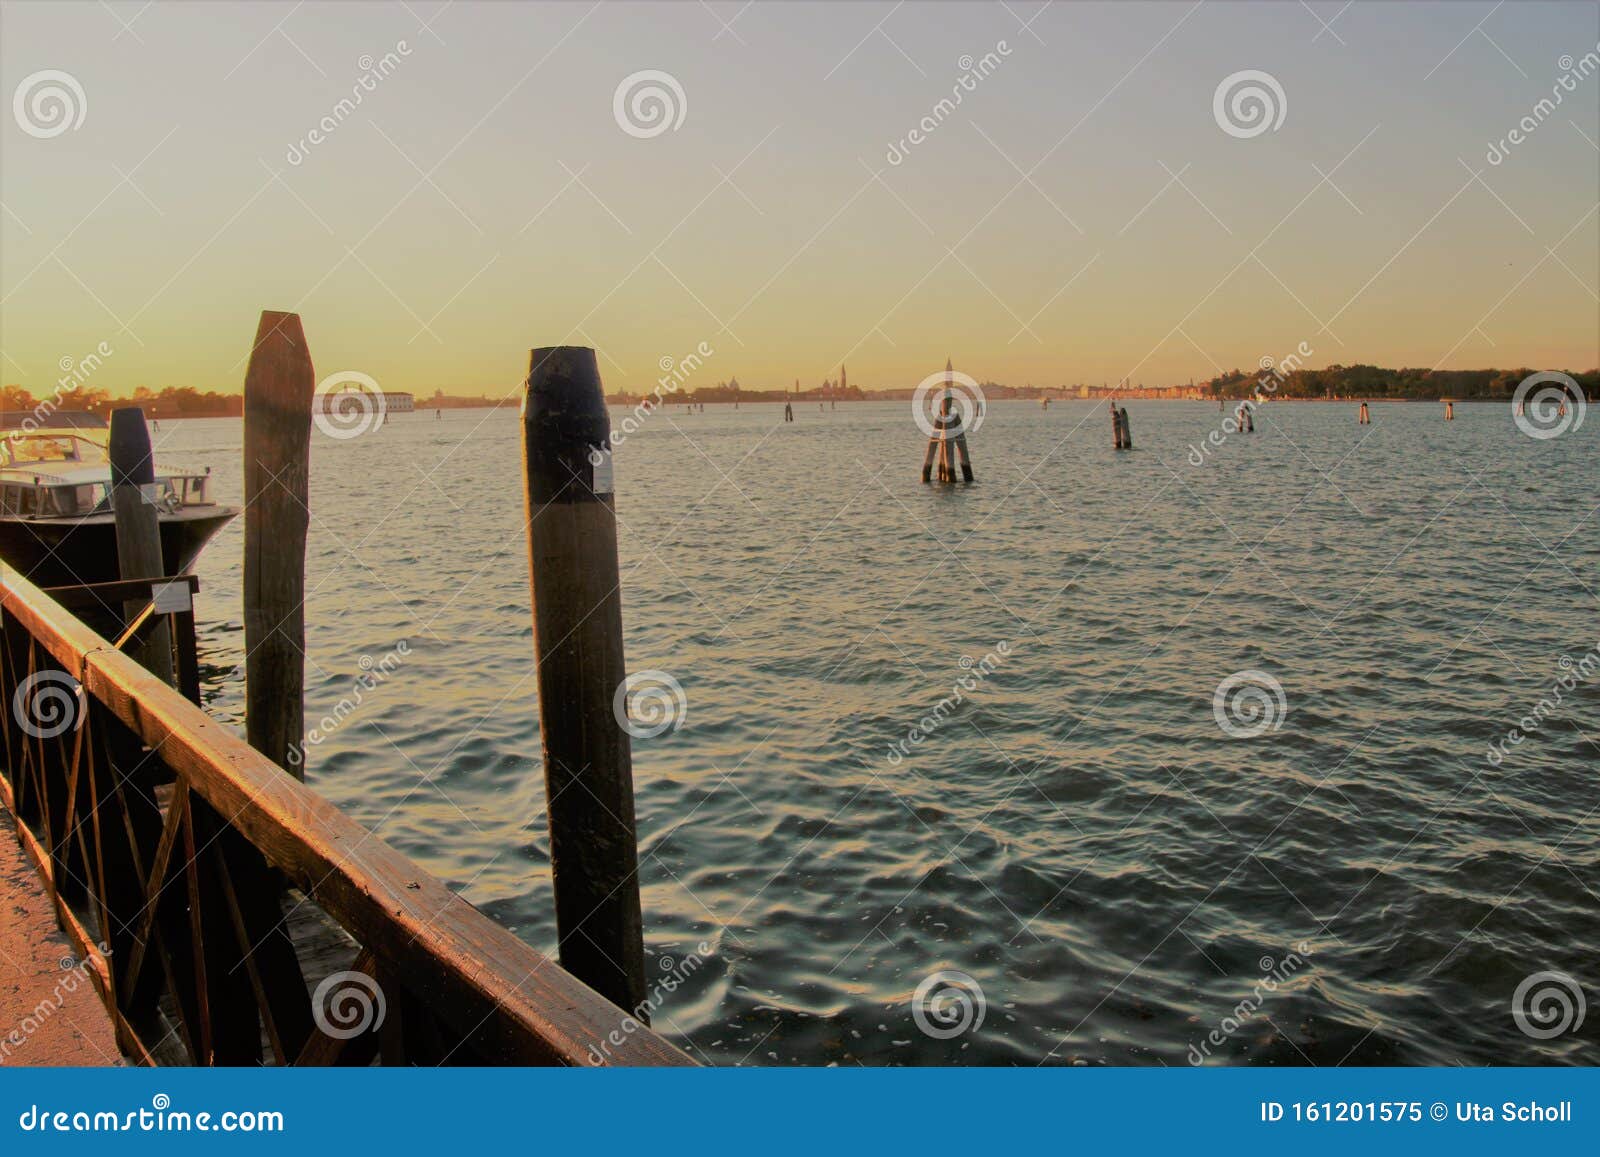 the lagoon of venice at sunset, seen from the island lido di venezia. italy.